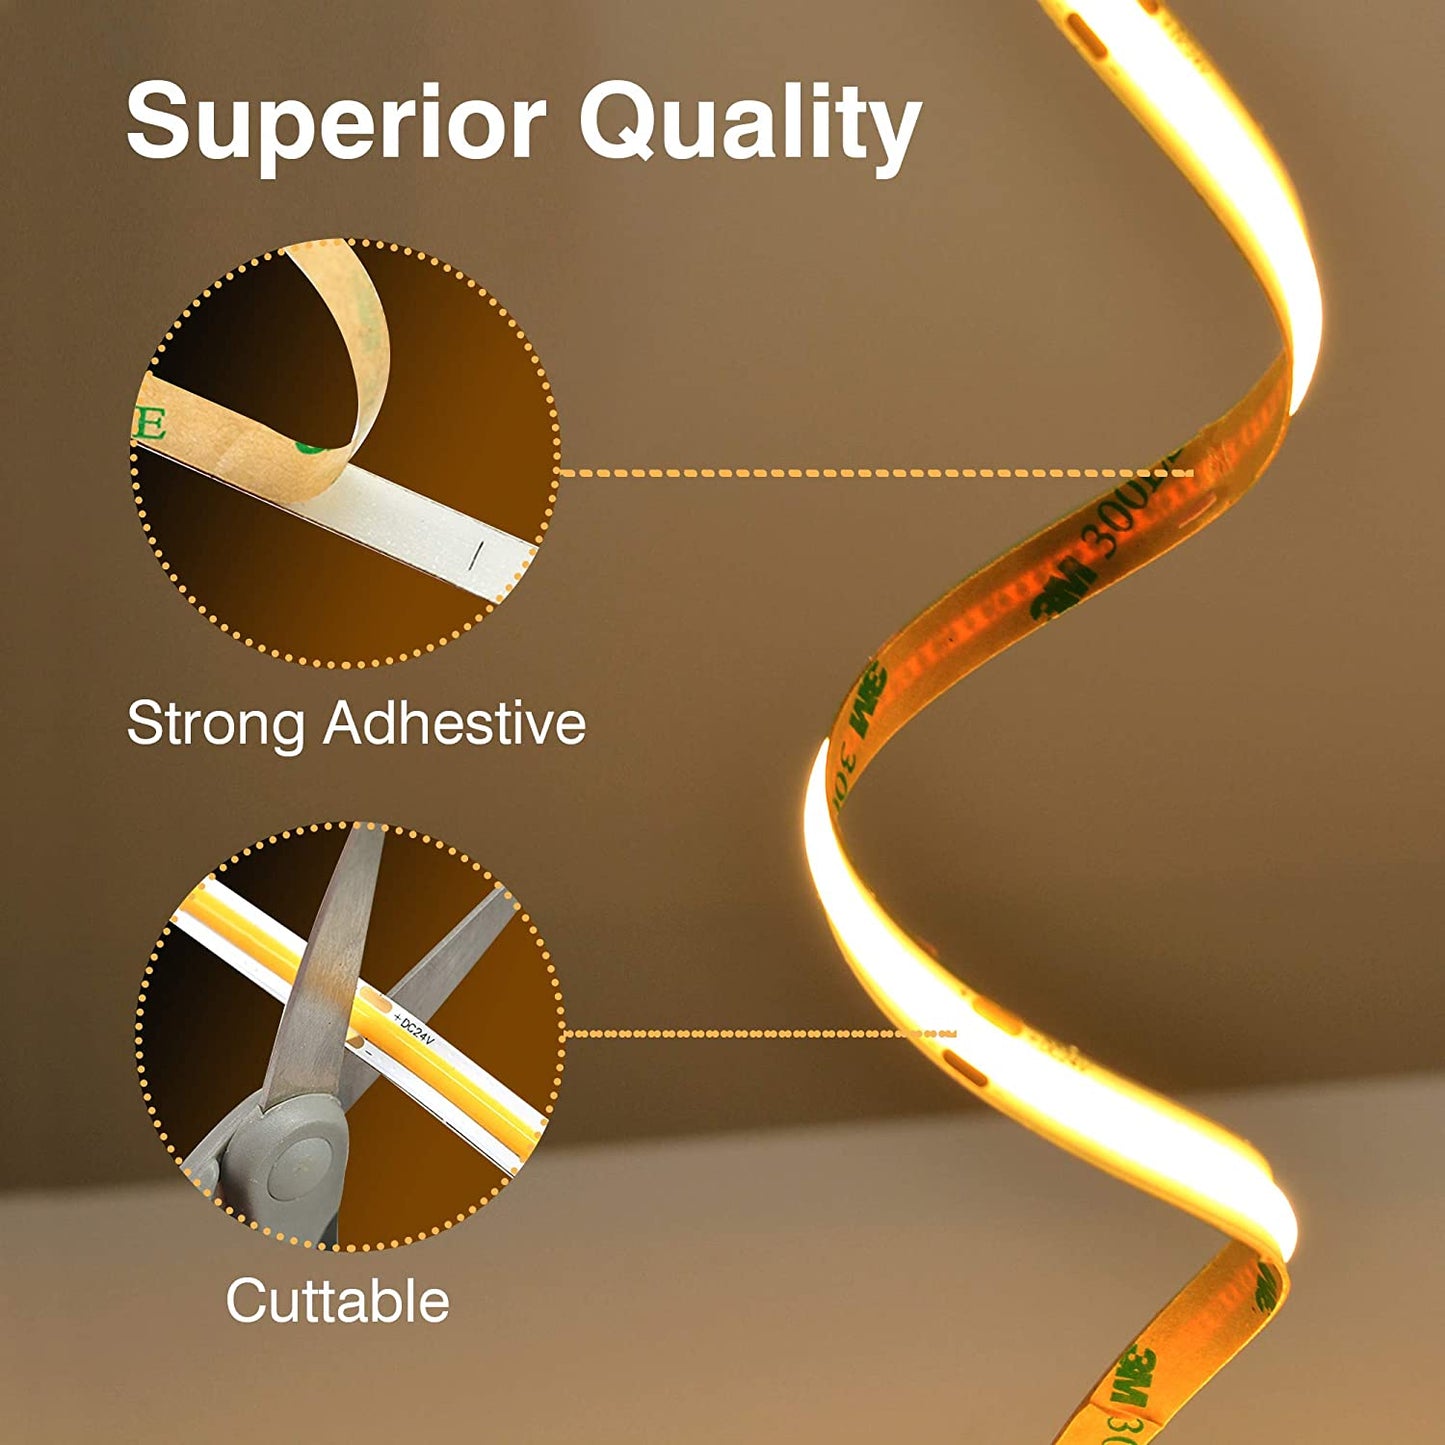 Send inquiry for 12V Cuttable LED Strips 5mm COB Under Cabinet Tape Lighting with RoHS, CE to high quality Cuttable LED Strips supplier. Wholesale Under Cabinet Tape Lighting directly from China Cuttable LED Strips manufacturers/exporters. Get a factory sale price list and become a distributor/agent-vstled.com